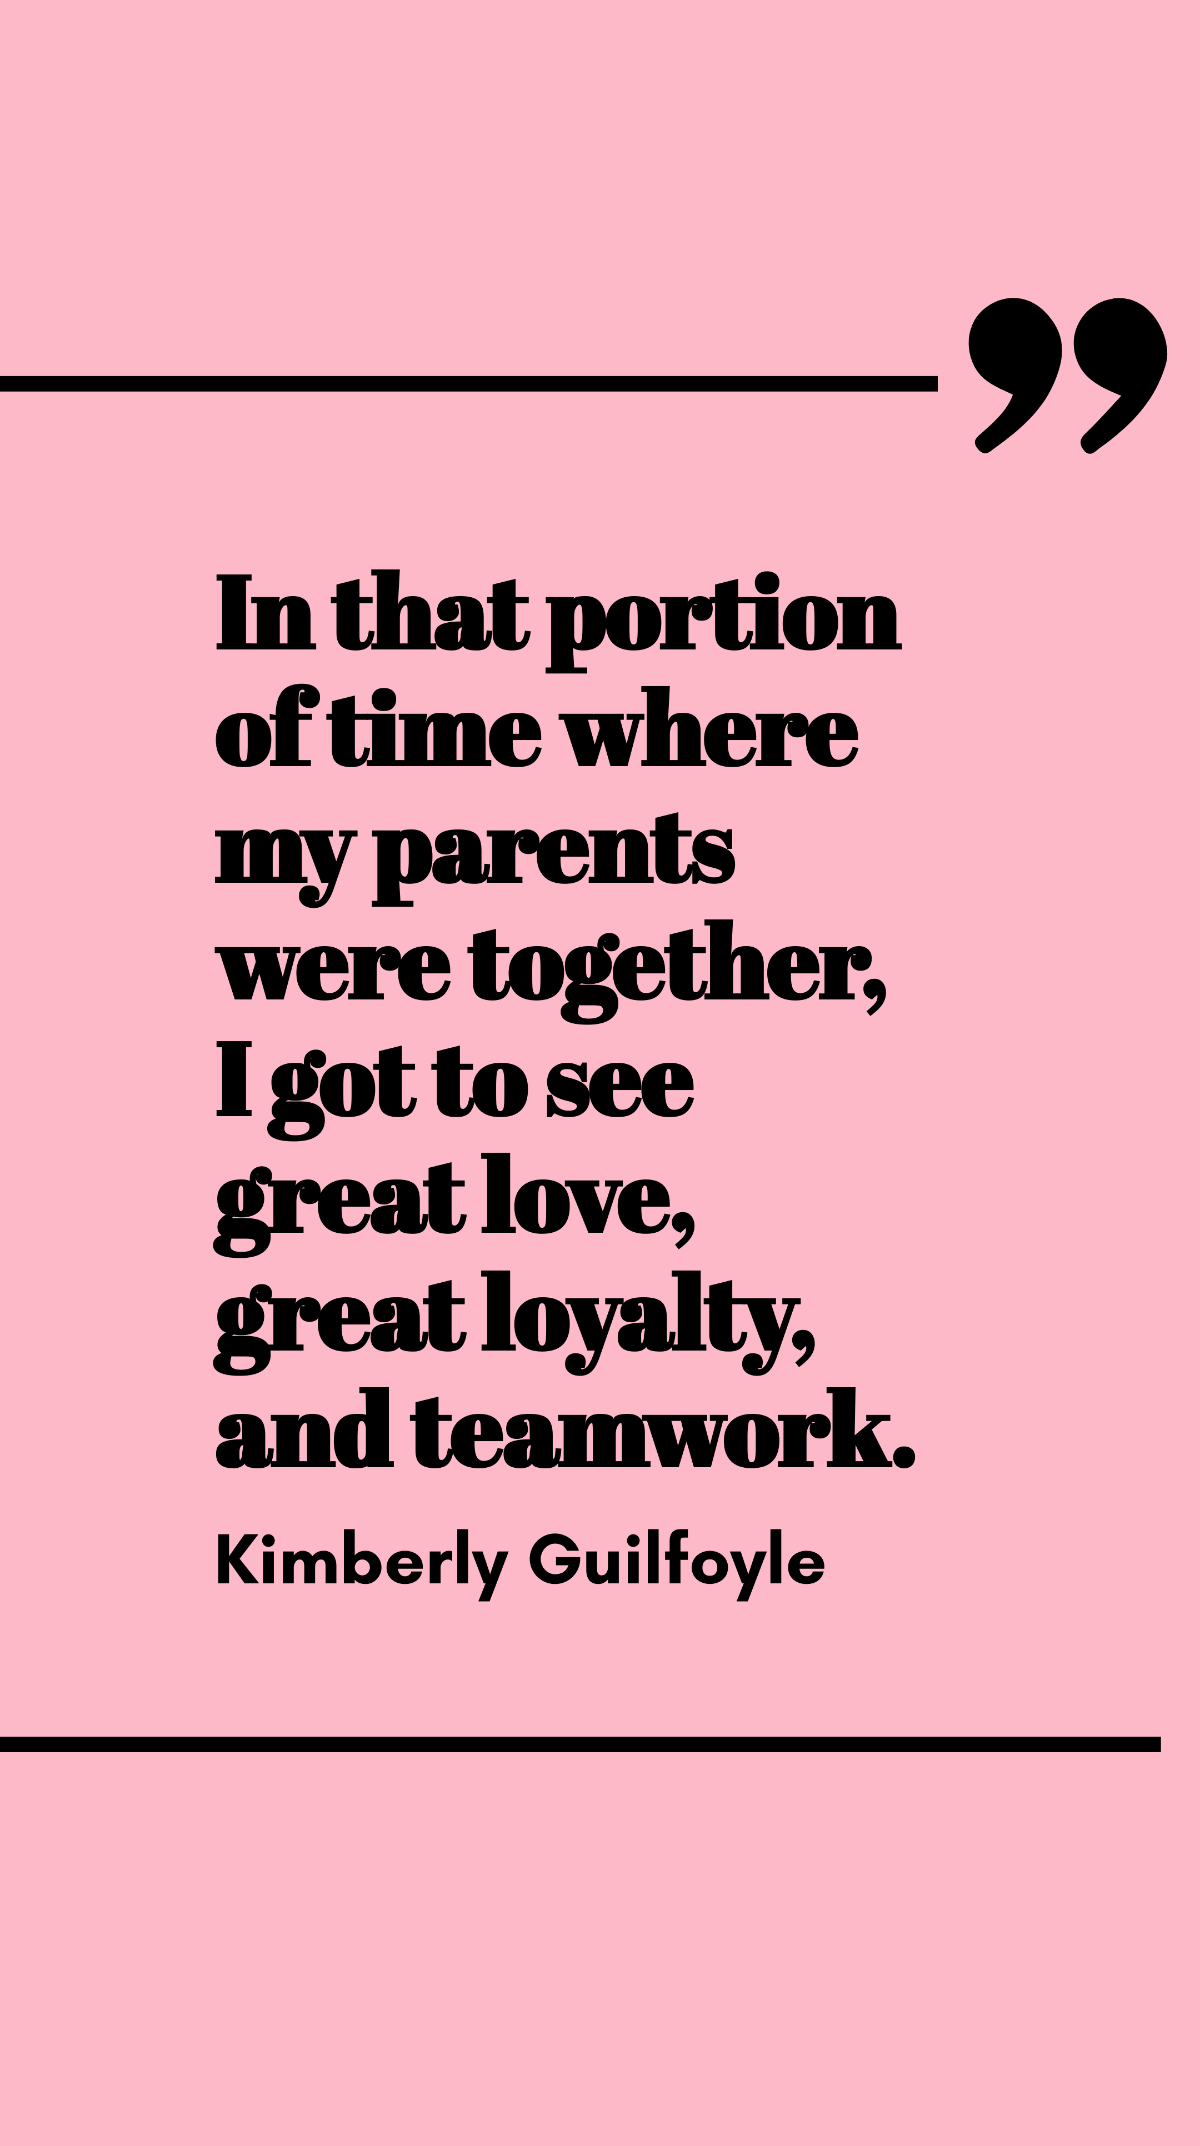 Kimberly Guilfoyle - In that portion of time where my parents were together, I got to see great love, great loyalty, and teamwork.